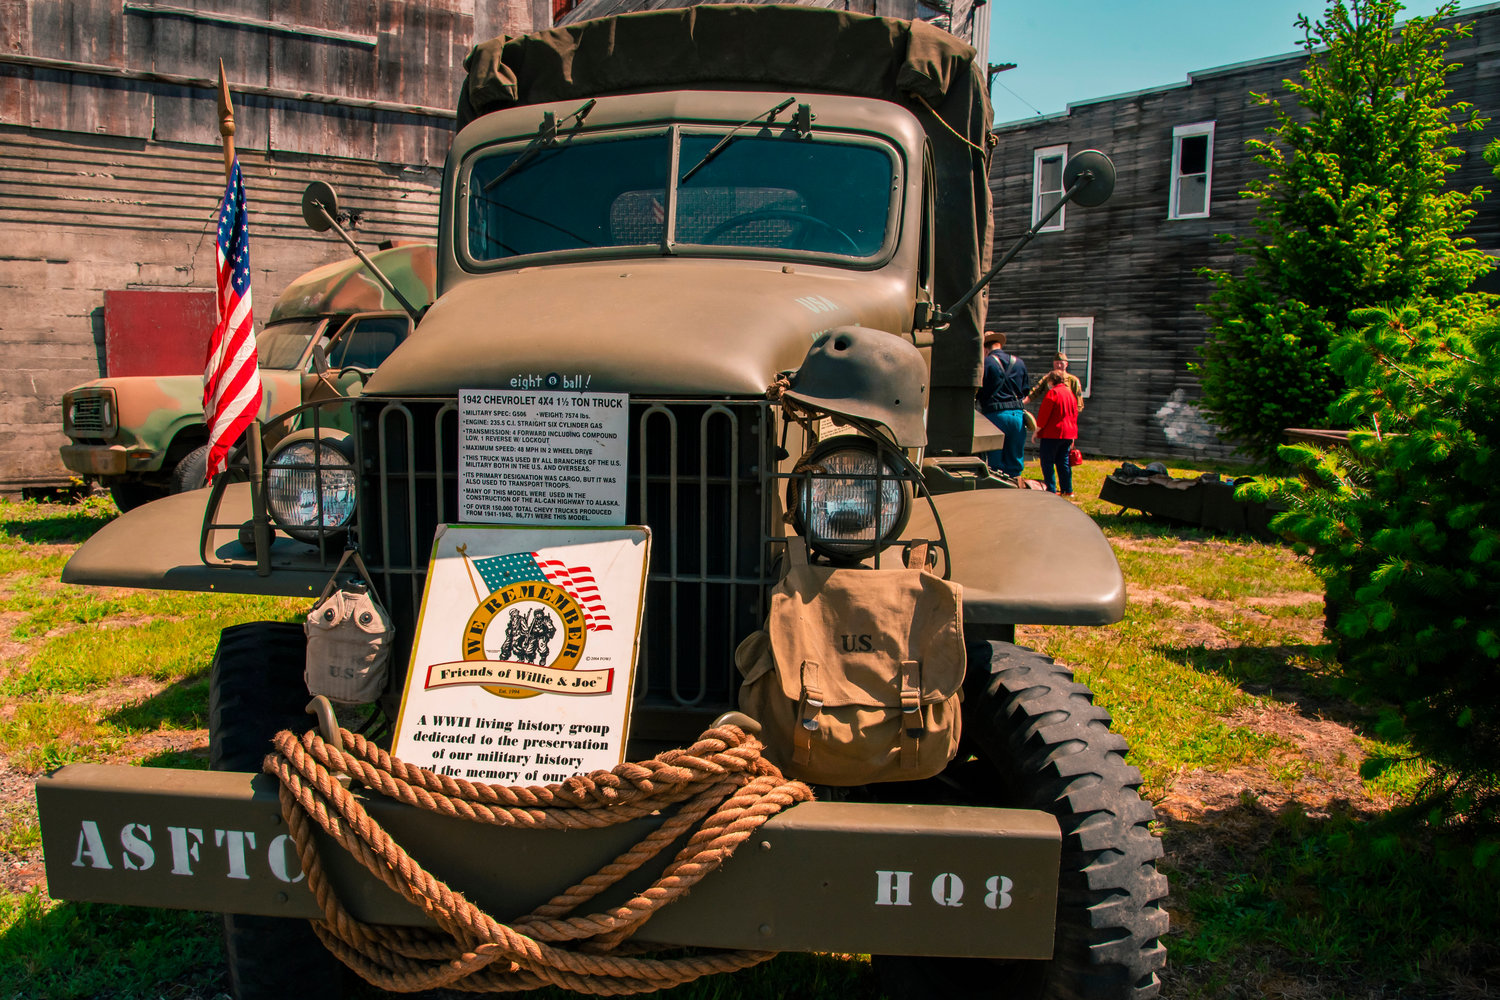 A 1942 Chevrolet 4x4 1 1/2 Ton Truck was on display during Armed Forces Day in downtown Centralia.